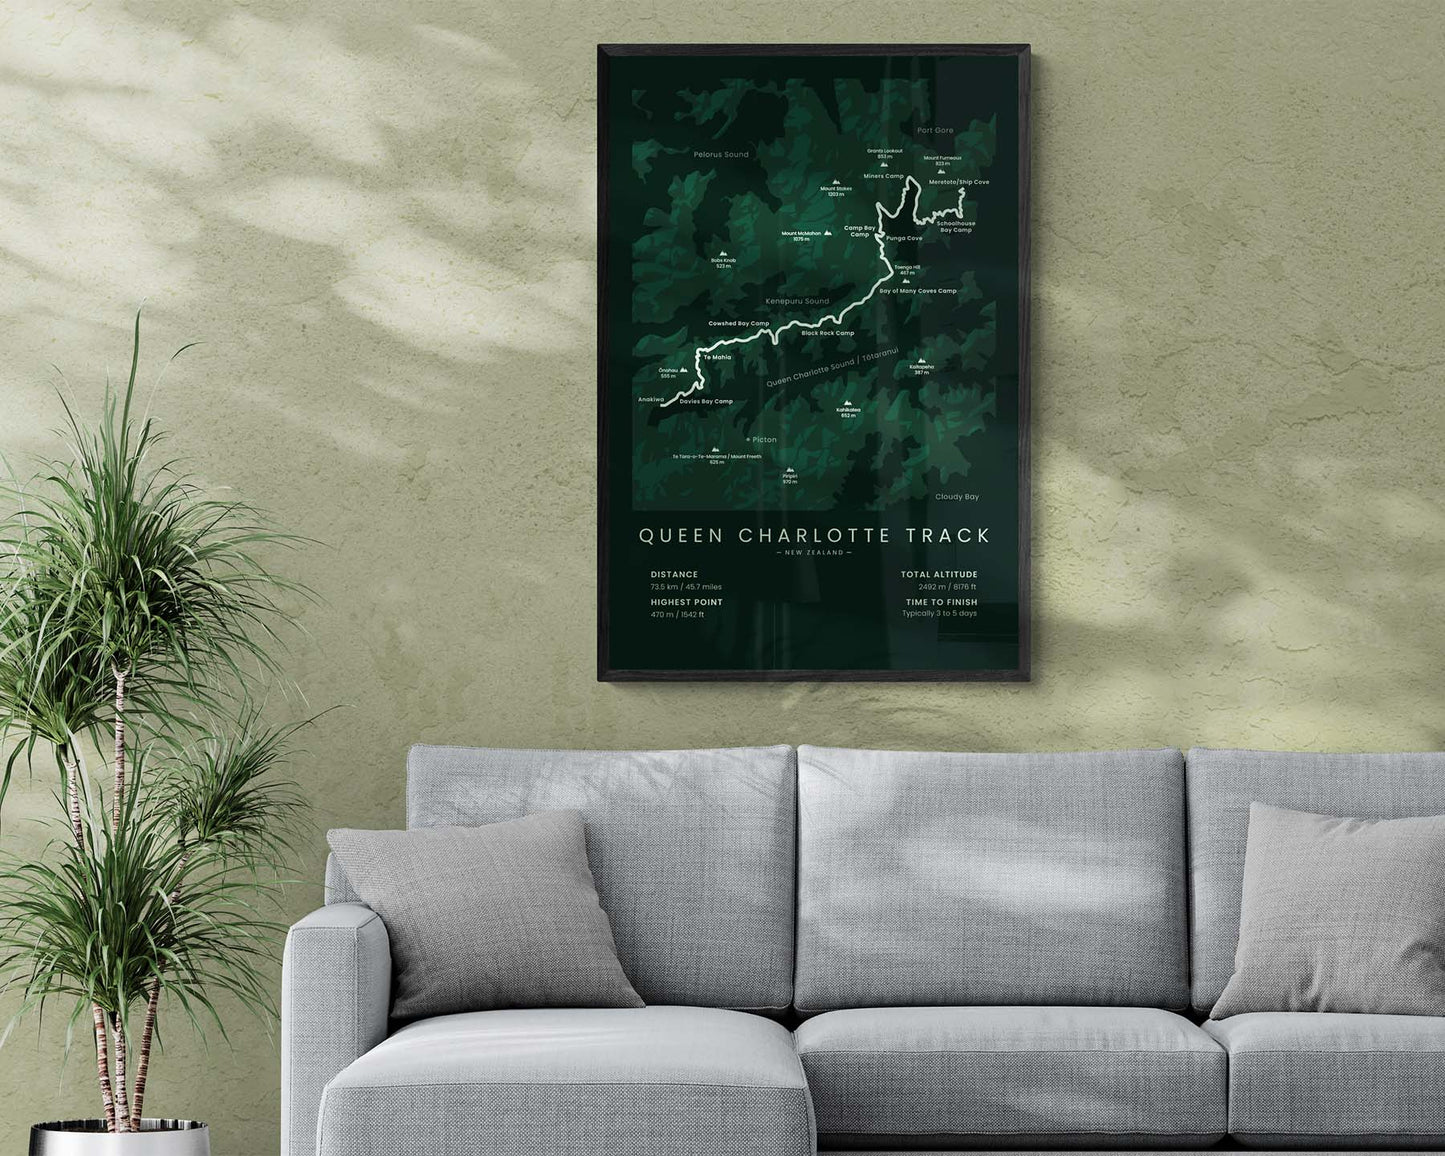 Queen Charlotte Walkway (New Zealand, Ship Cove to Anakiwa, Queen Charlotte Sound, Kenepuru Sound, Marlborough Sounds) Poster Print in Minimal Interior Decor